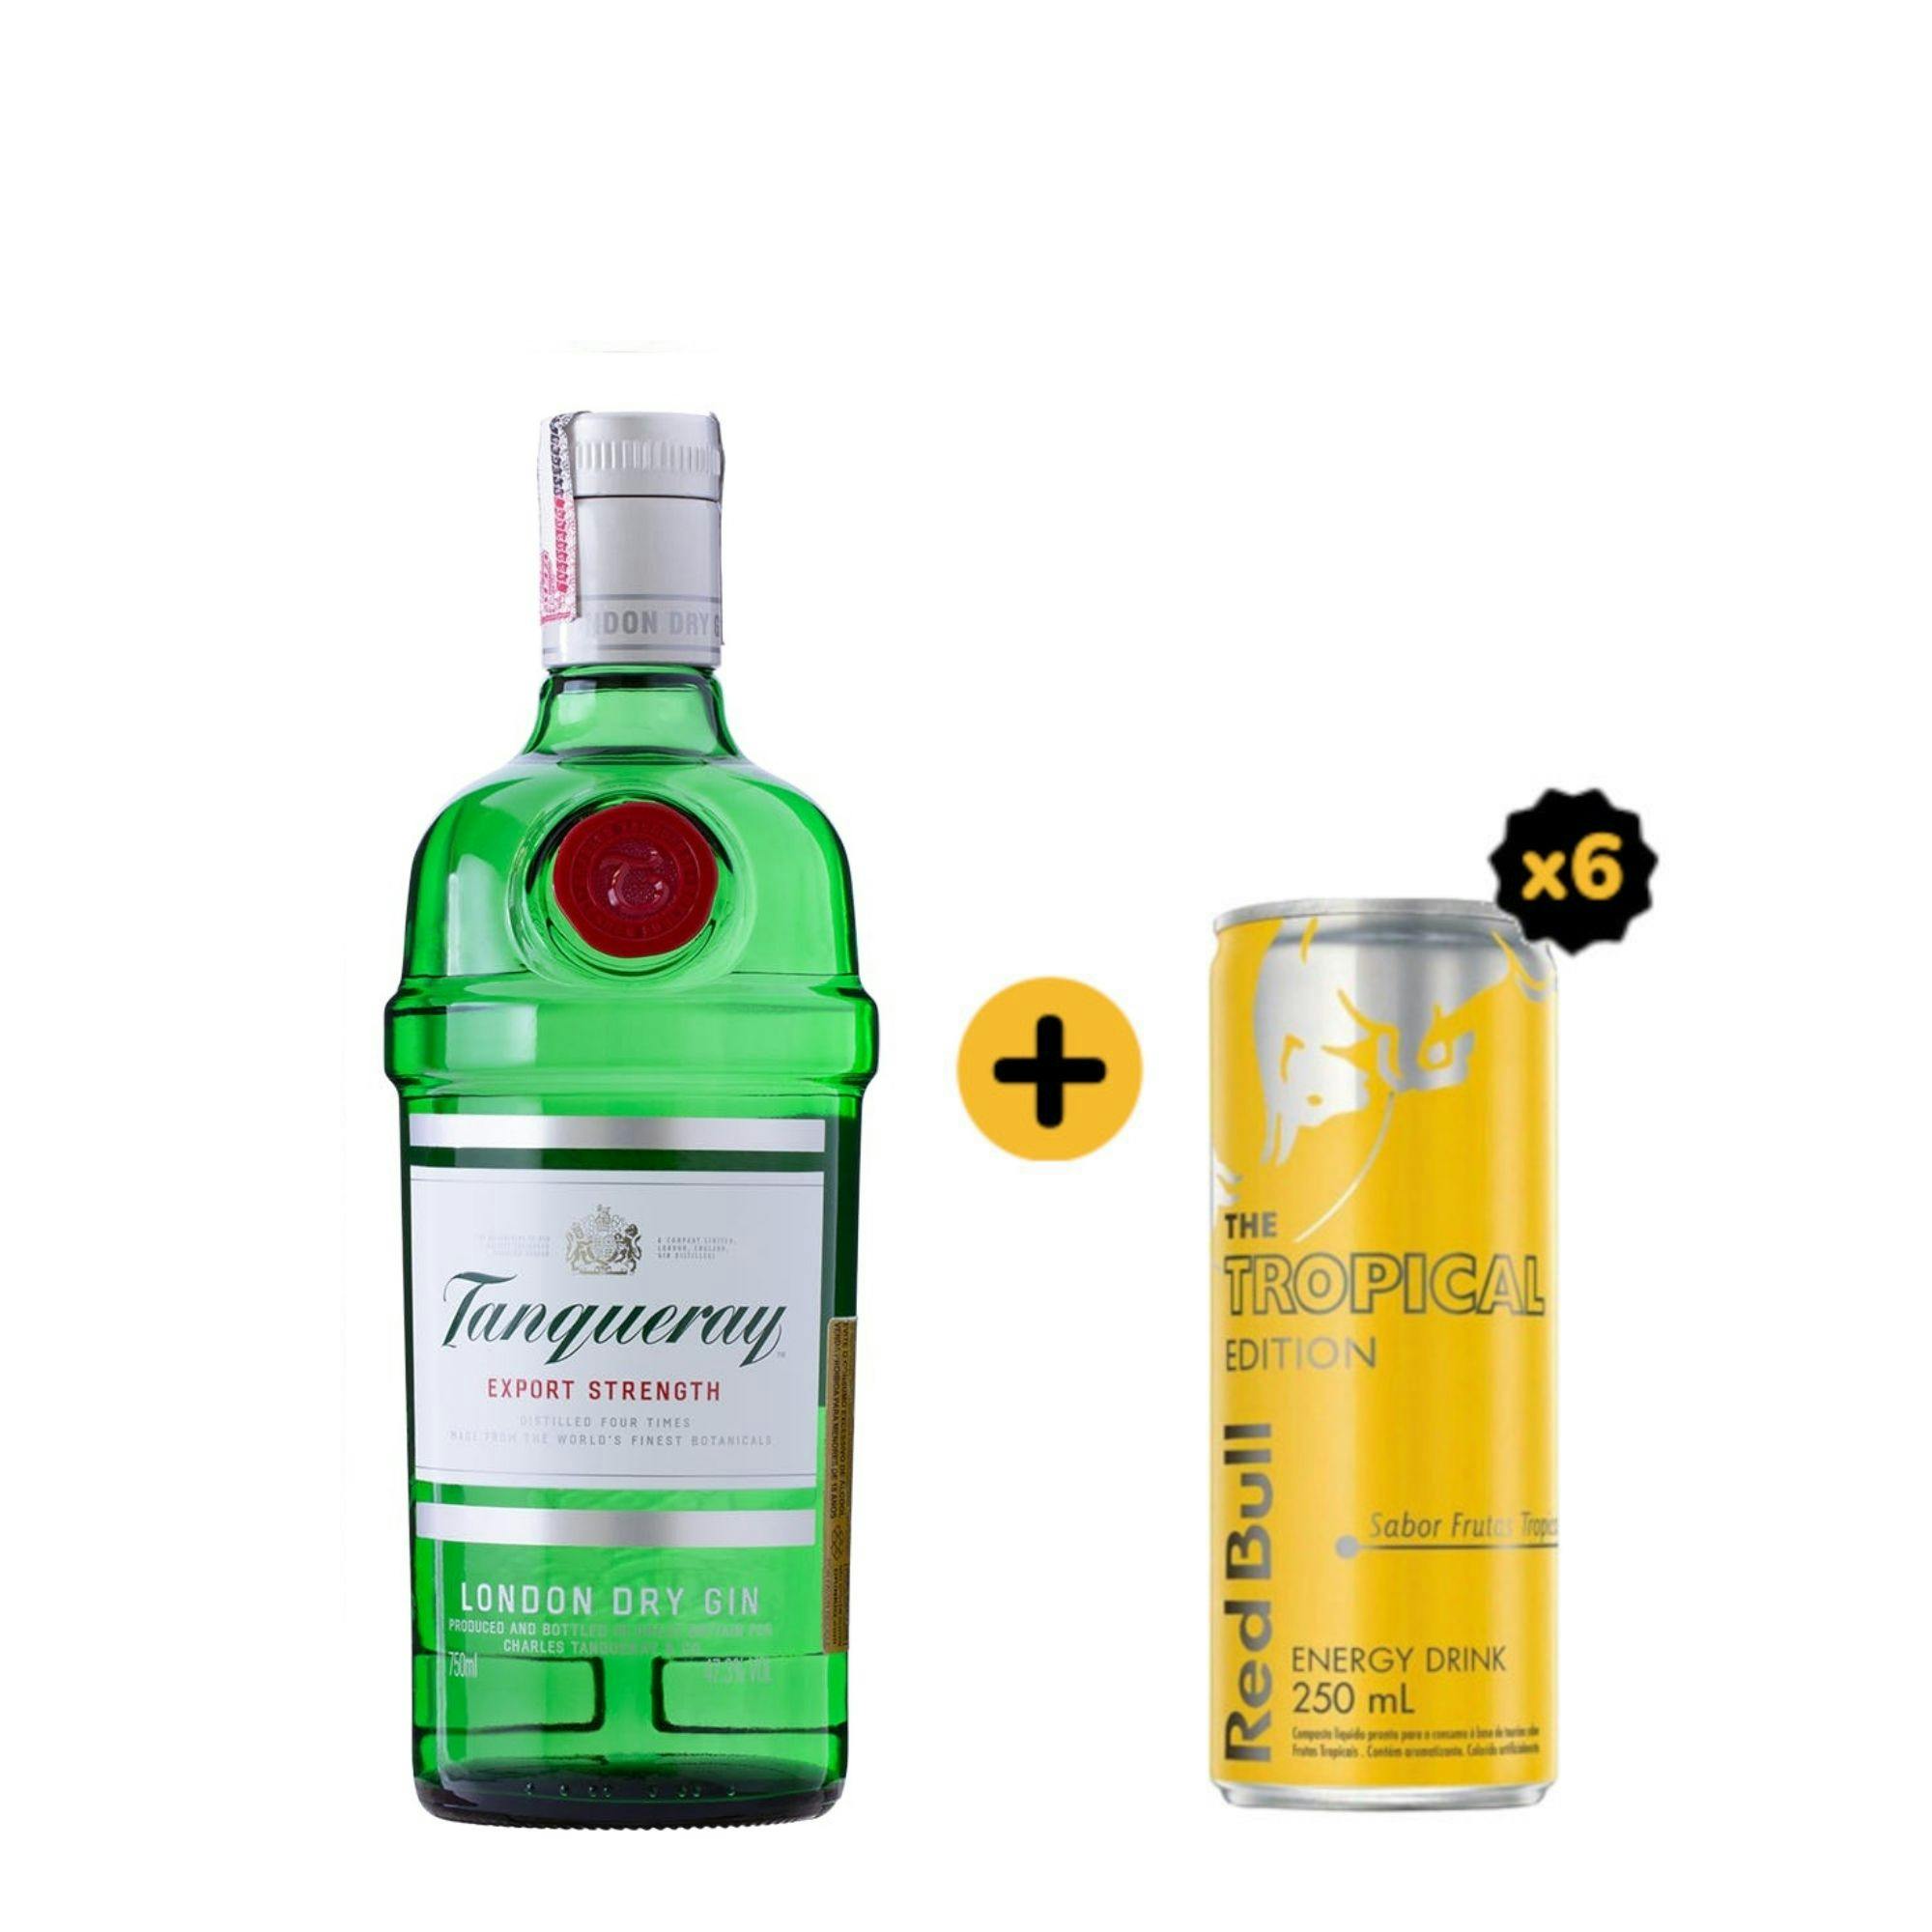 Combo Tanqueray + Red Bull (1 Gin Tanqueray 750ml + 6 Red Bull Tropical Edition 250ml)